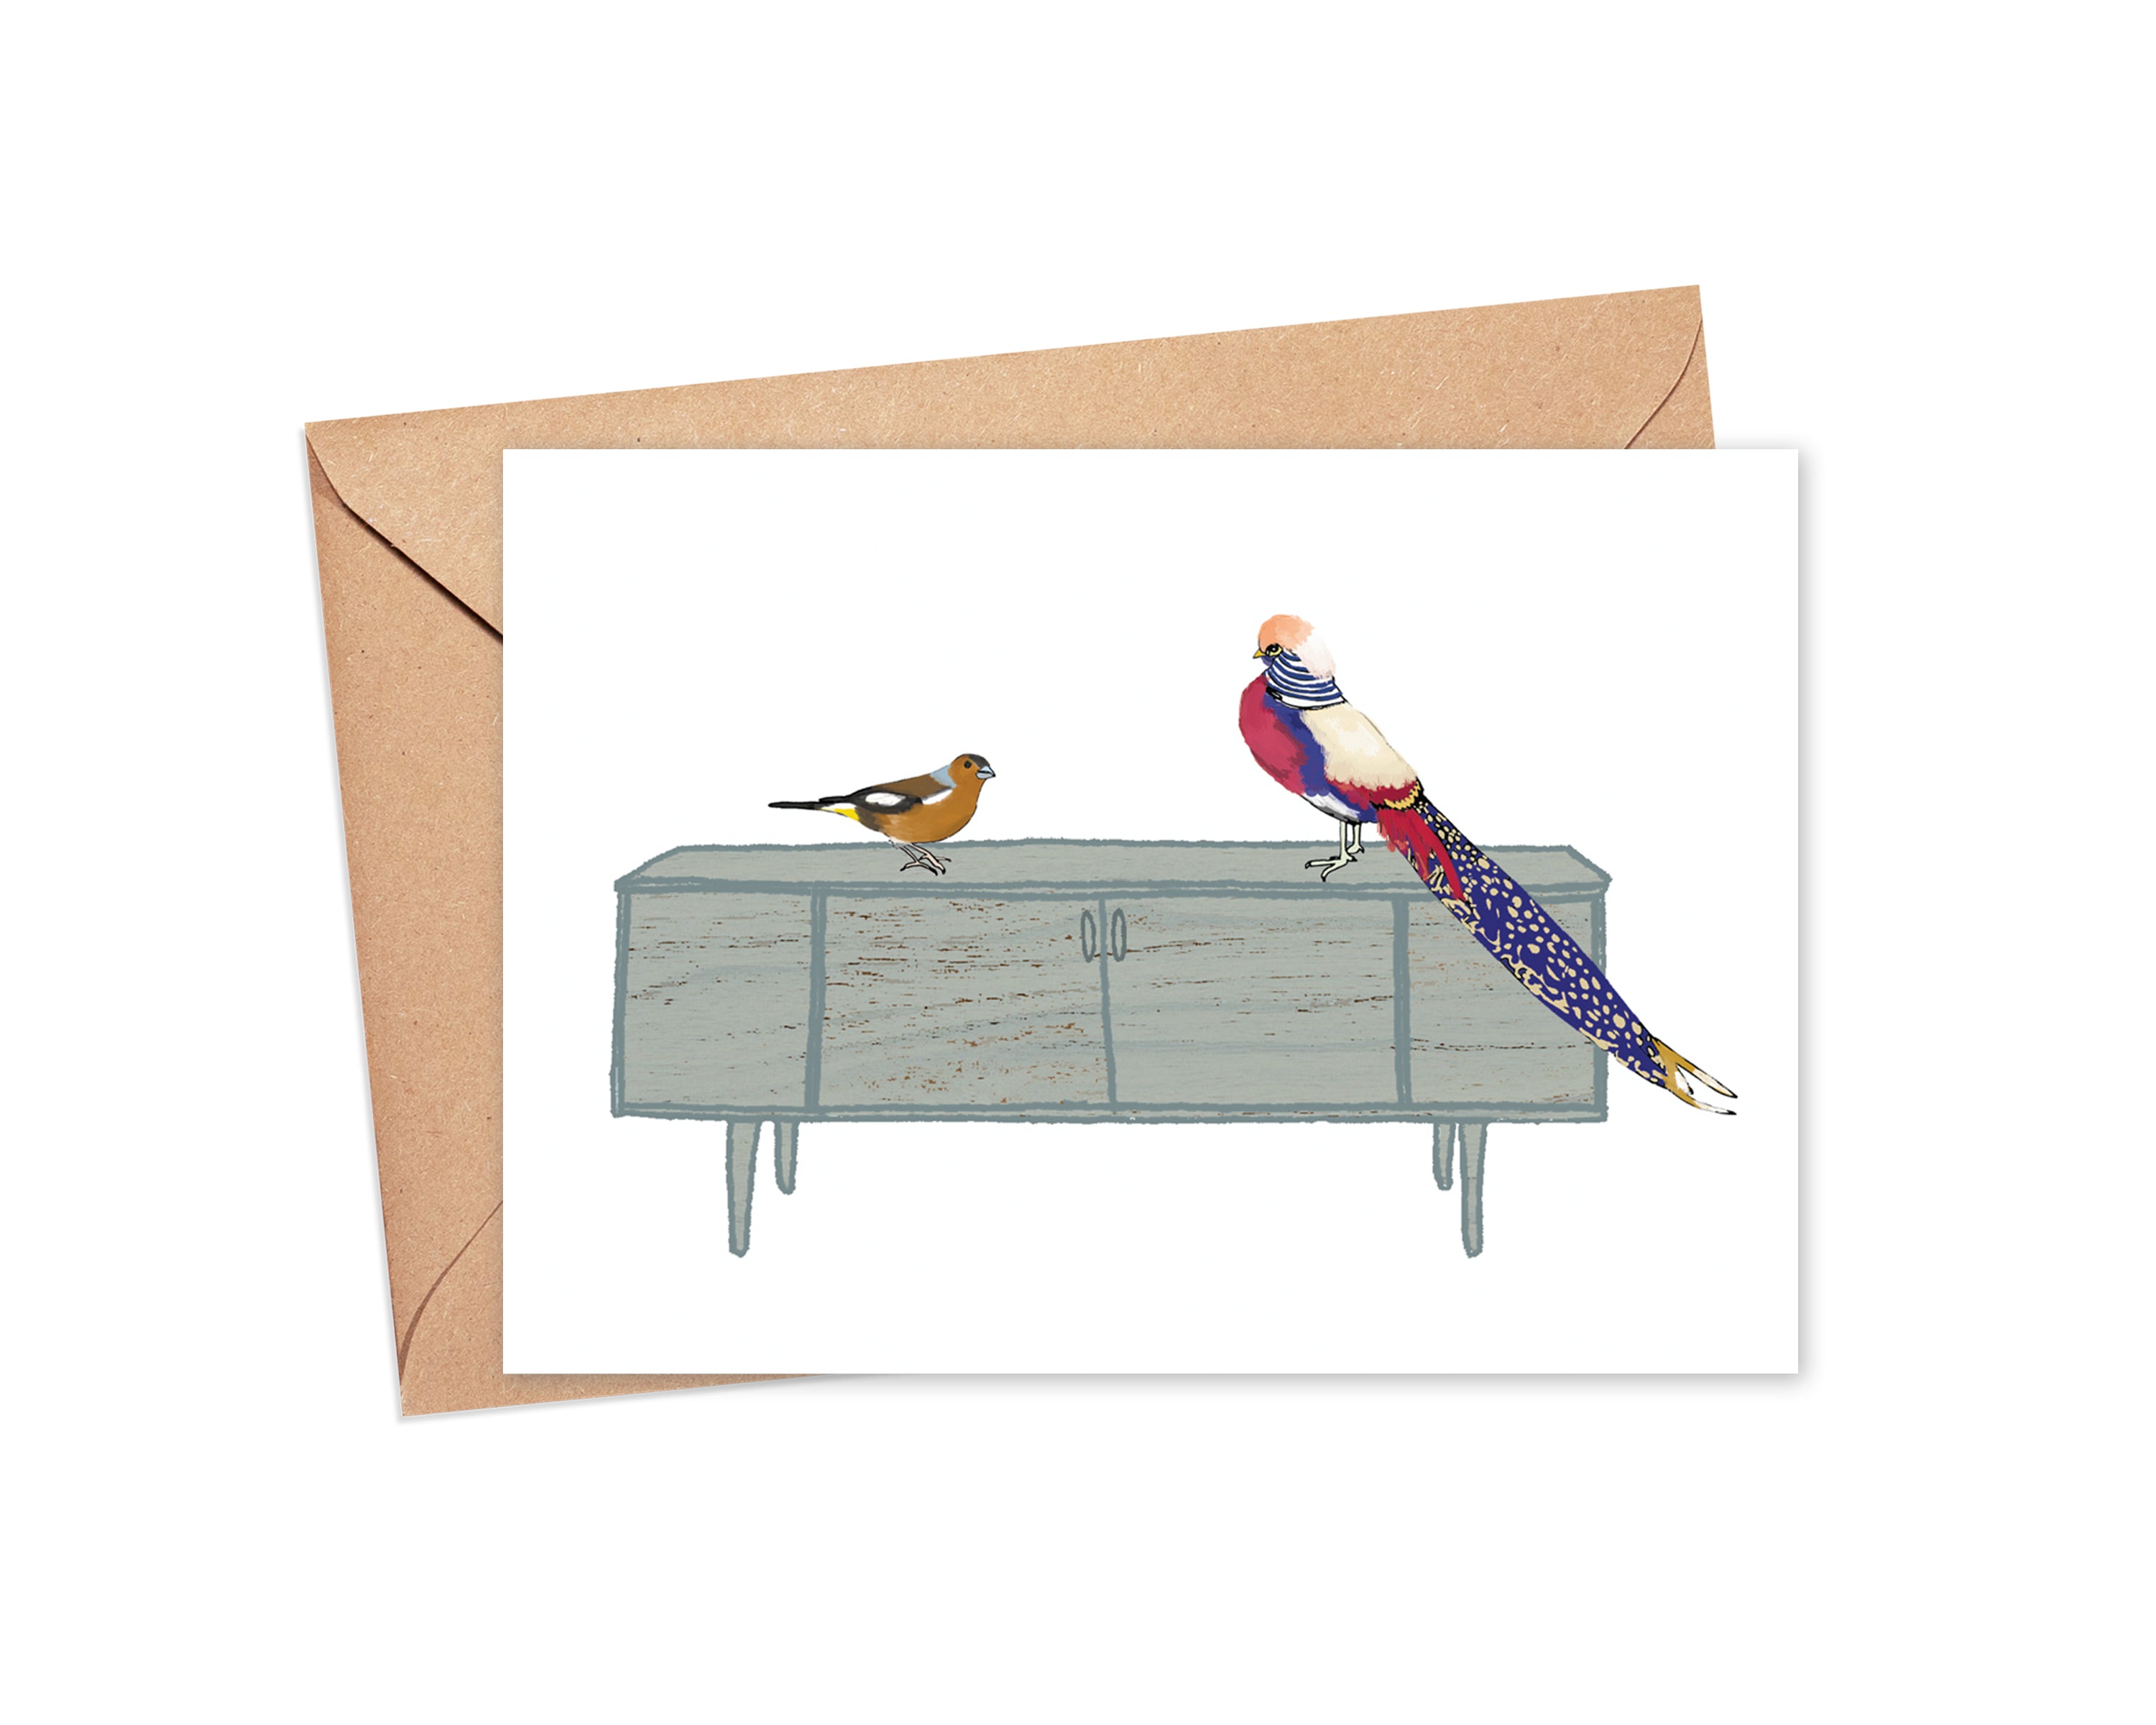 "Sideshow on the Sideboard" Blank Card